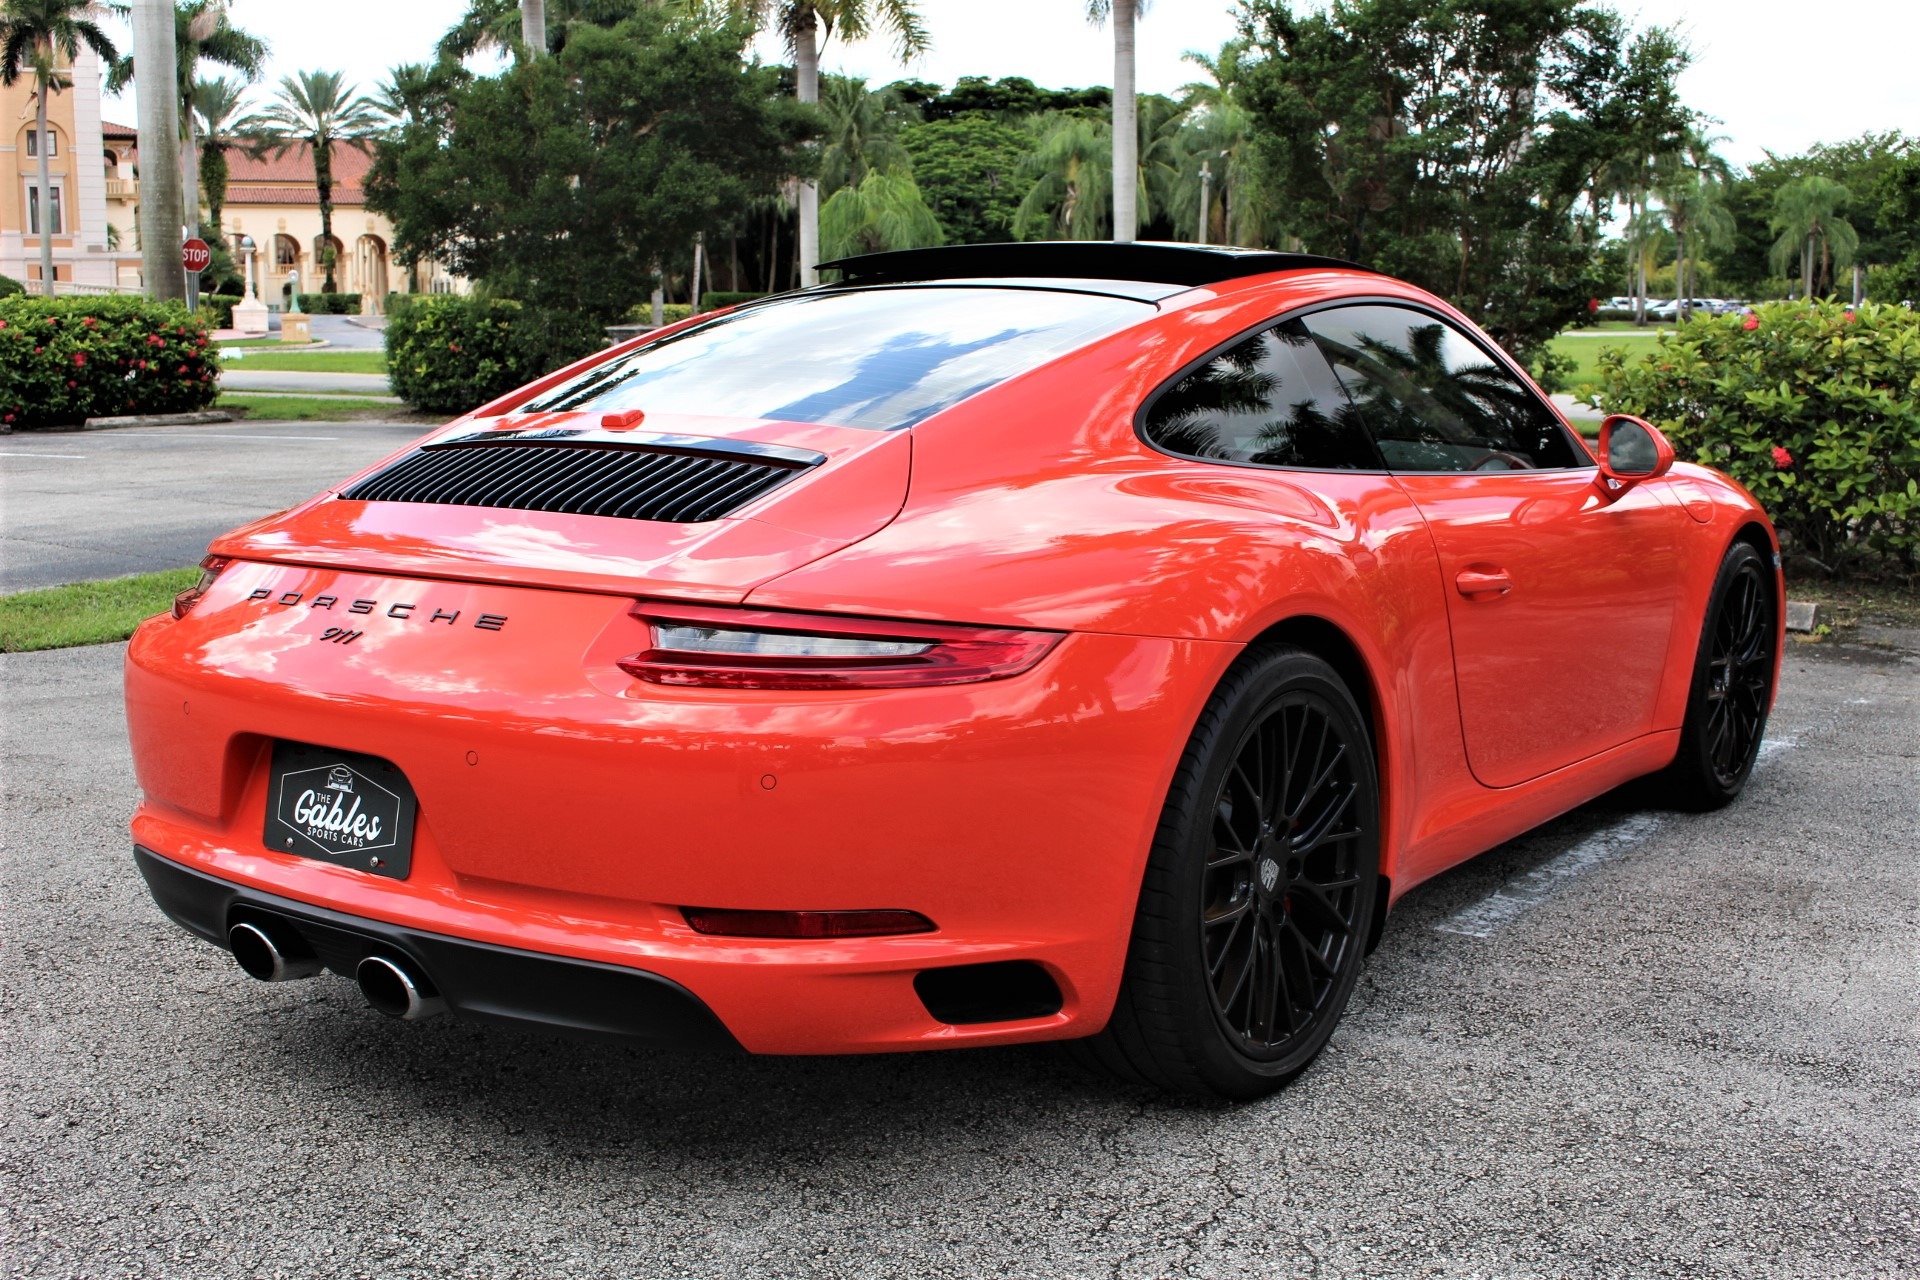 Used 2017 Porsche 911 Carrera S for sale Sold at The Gables Sports Cars in Miami FL 33146 4